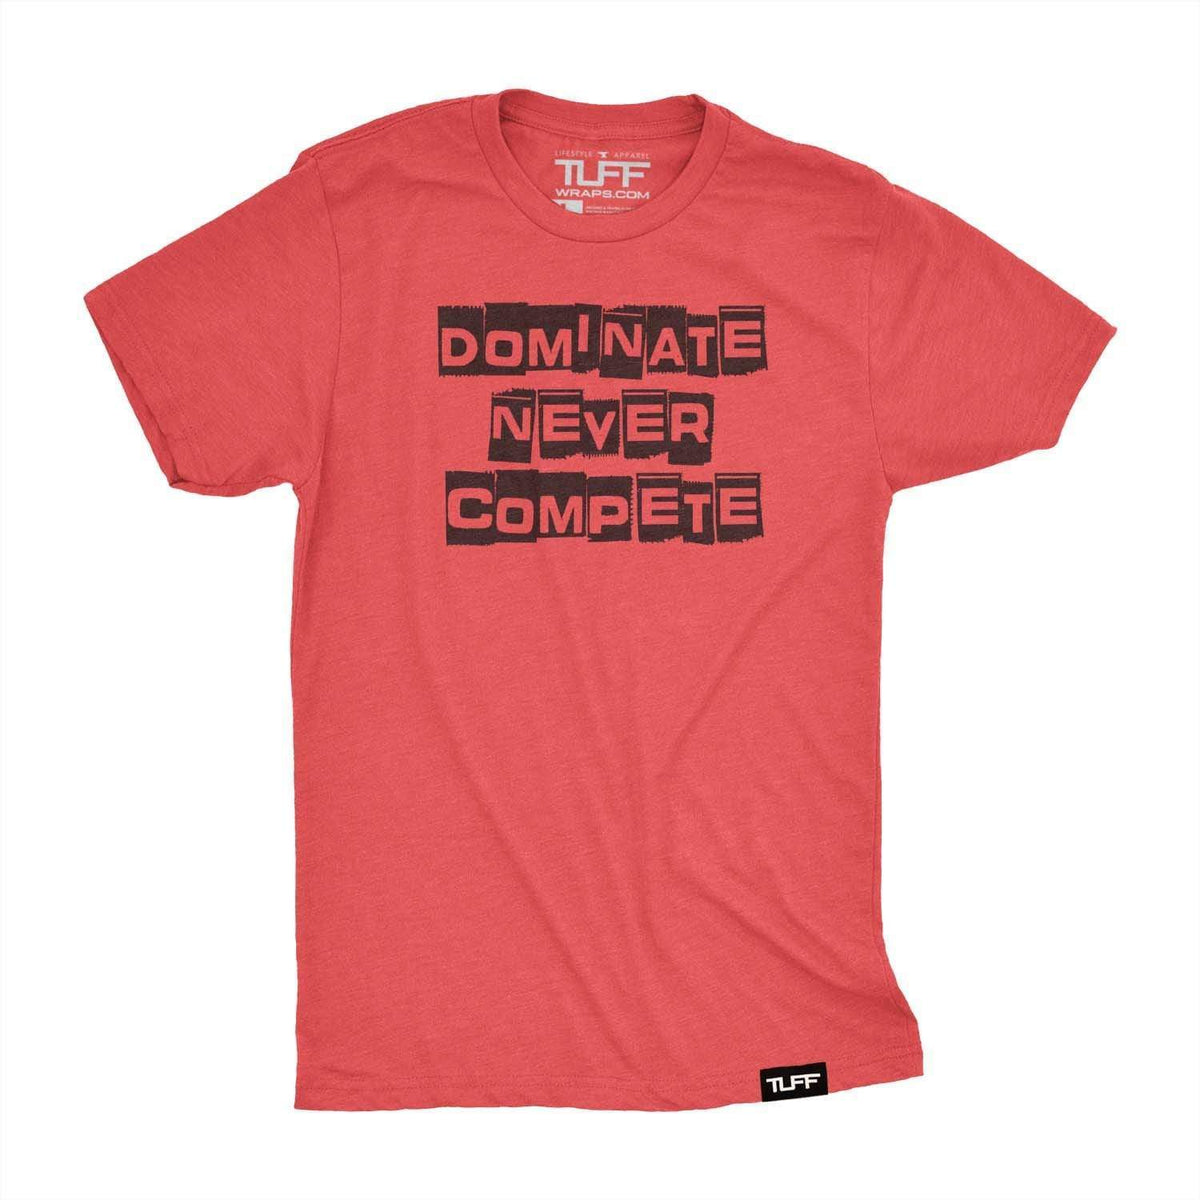 Dominate Never Compete Tee S / Vintage Red TuffWraps.com